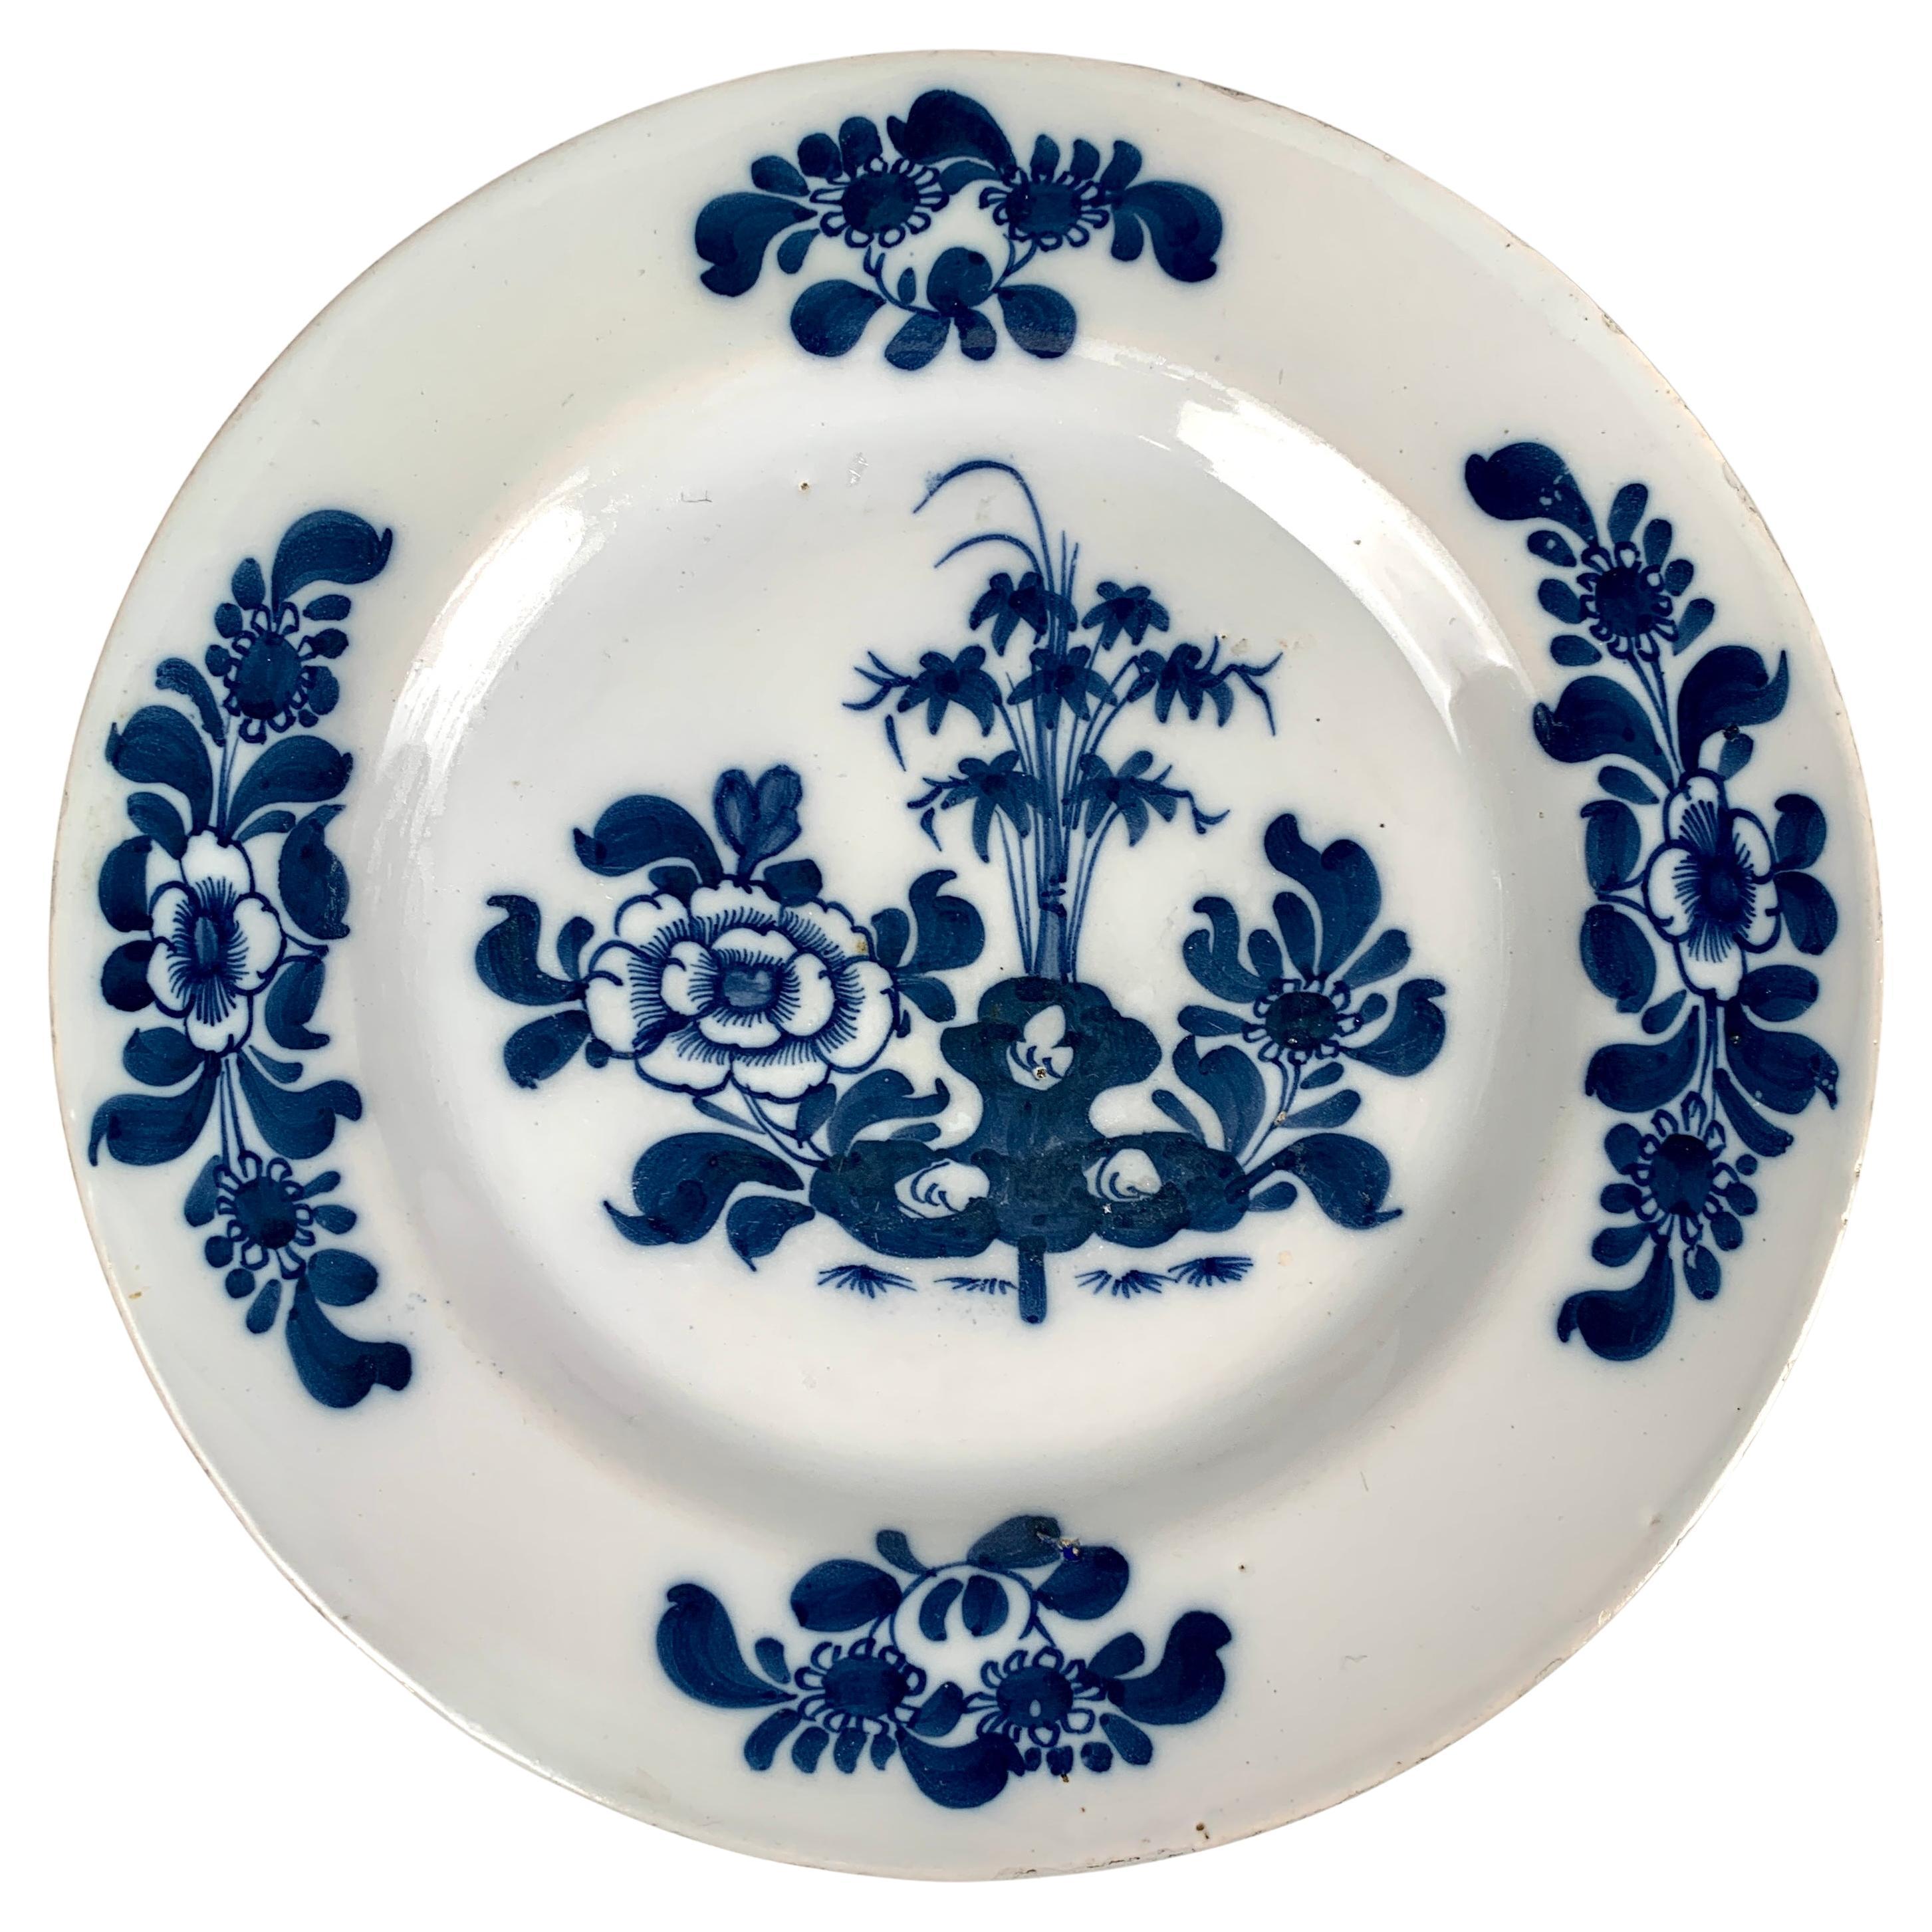 These exquisite hand-painted Delftware dishes, made in Bristol, England, circa 1760 and inspired by Chinese blue and white porcelain, are a perfect example of the mid-18th-century English Delftware artisans' skill and creativity. 
The deep cobalt